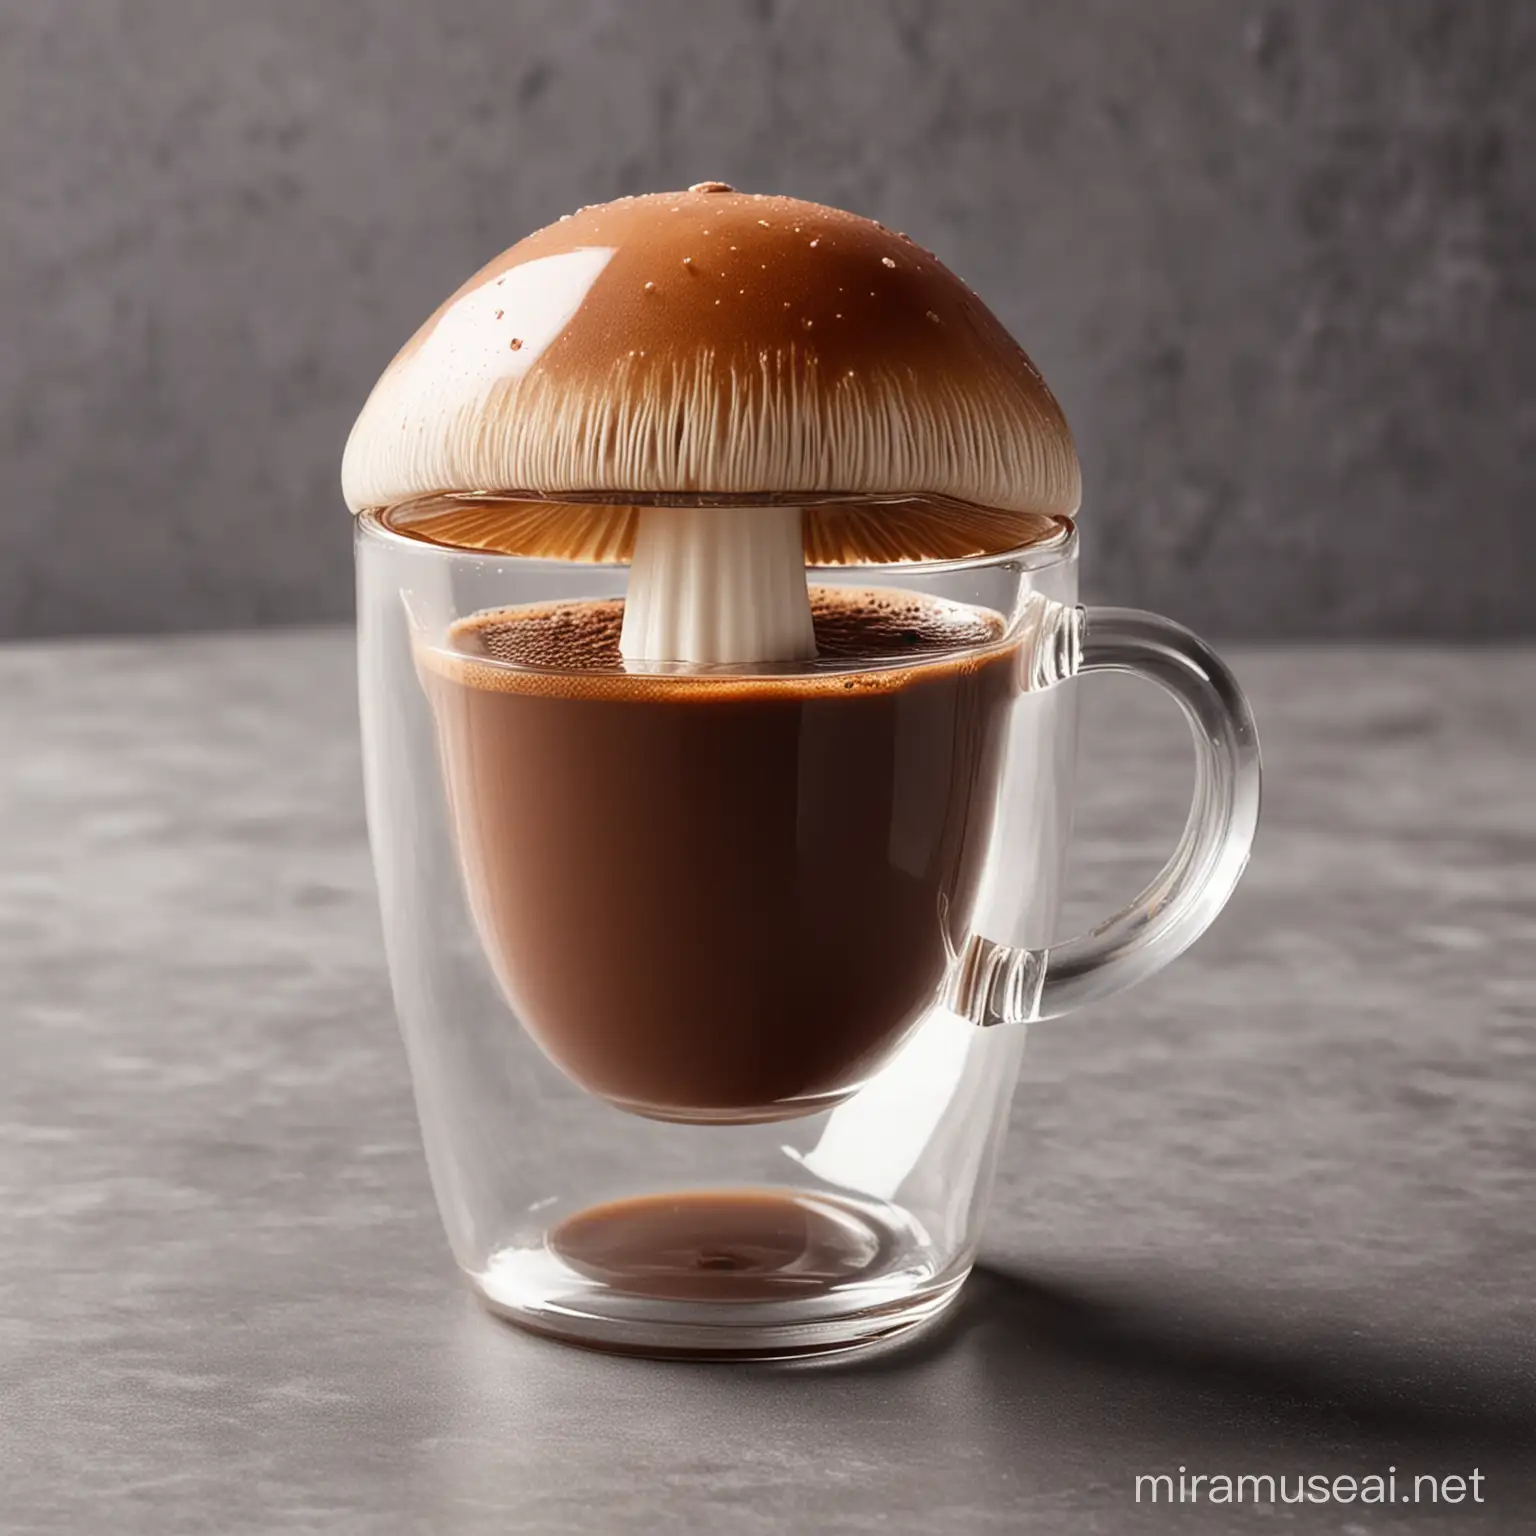 Transparent MushroomShaped Cup with Steaming Hot Chocolate